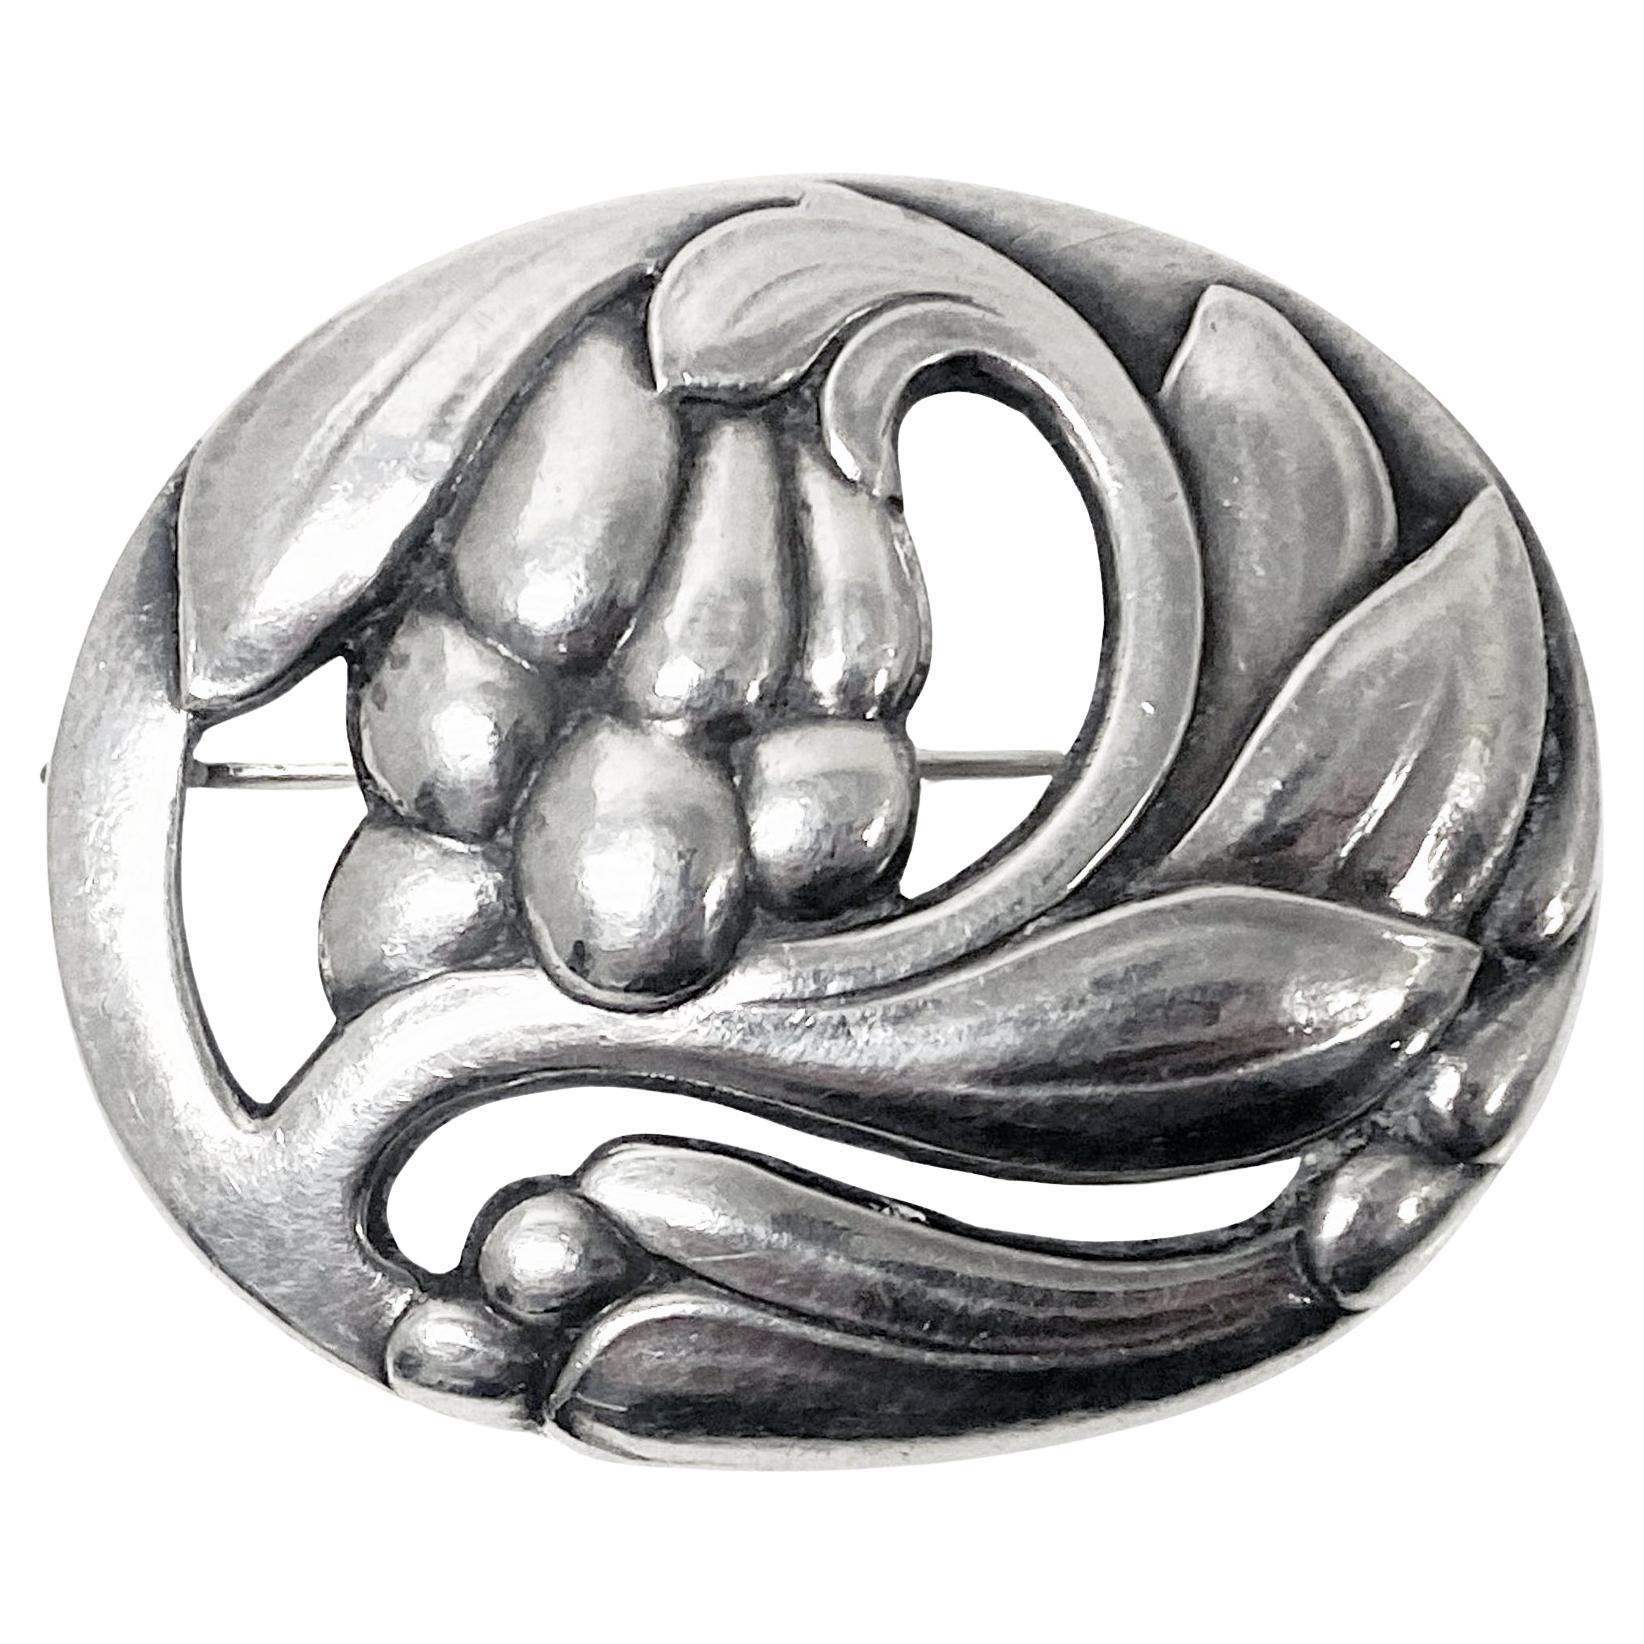 Georg Jensen Sterling Silver Blossom Pin C.1940 No 65 For Sale